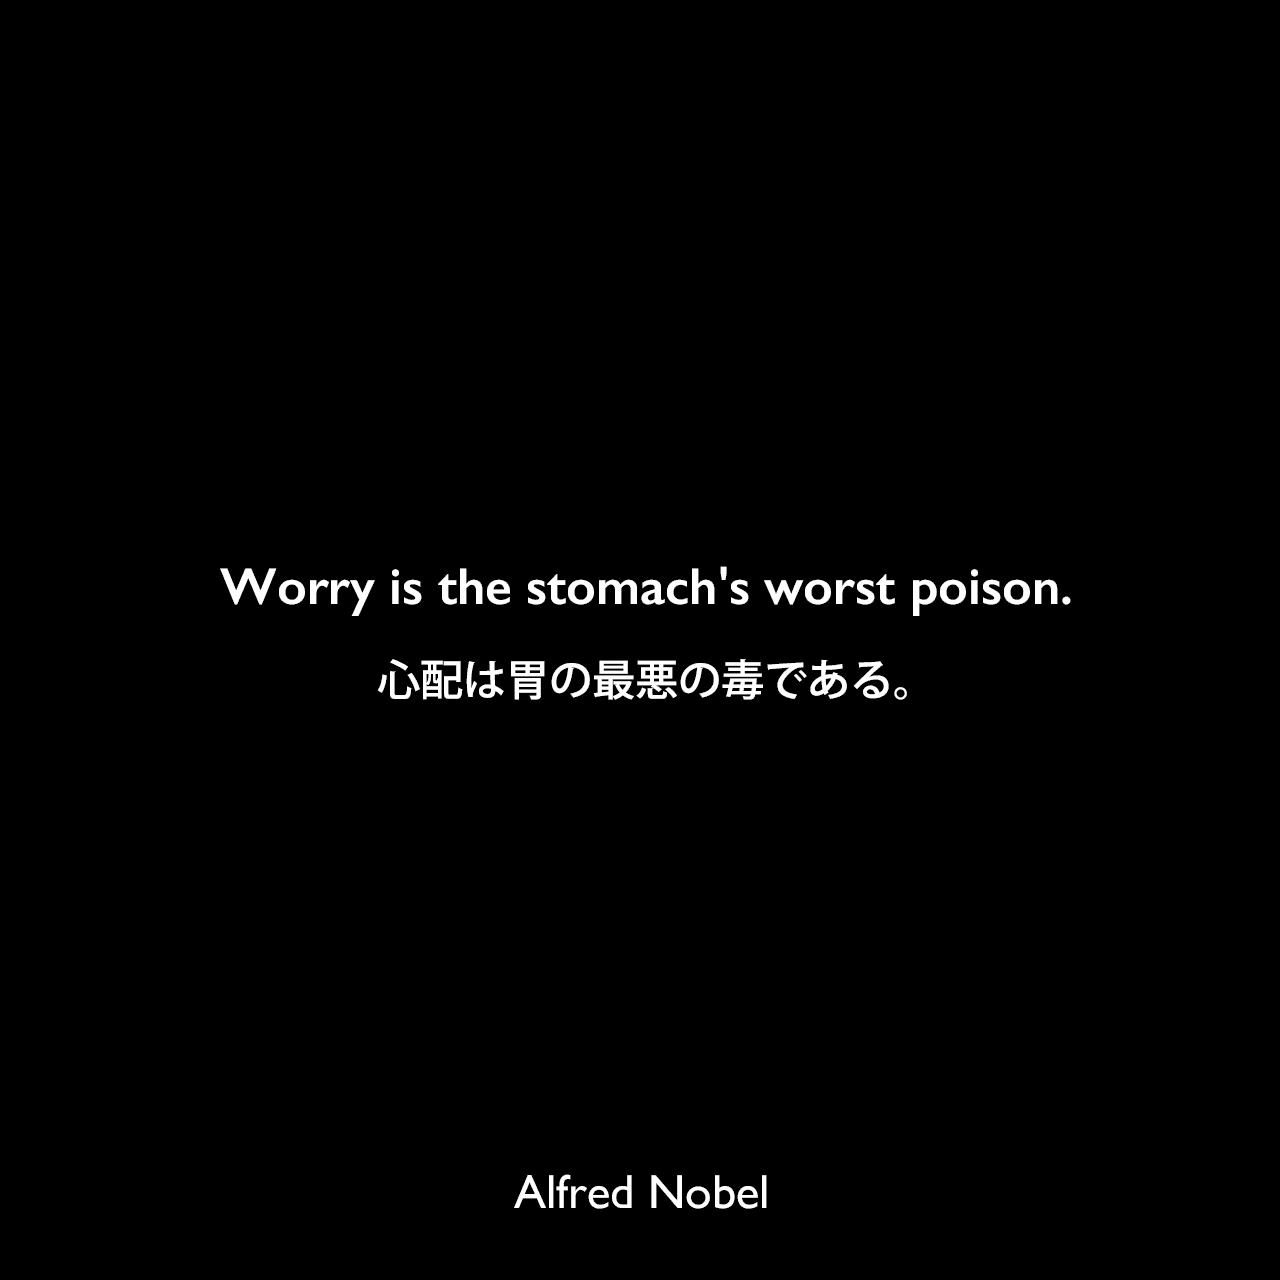 Worry is the stomach's worst poison.心配は胃の最悪の毒である。Alfred Nobel